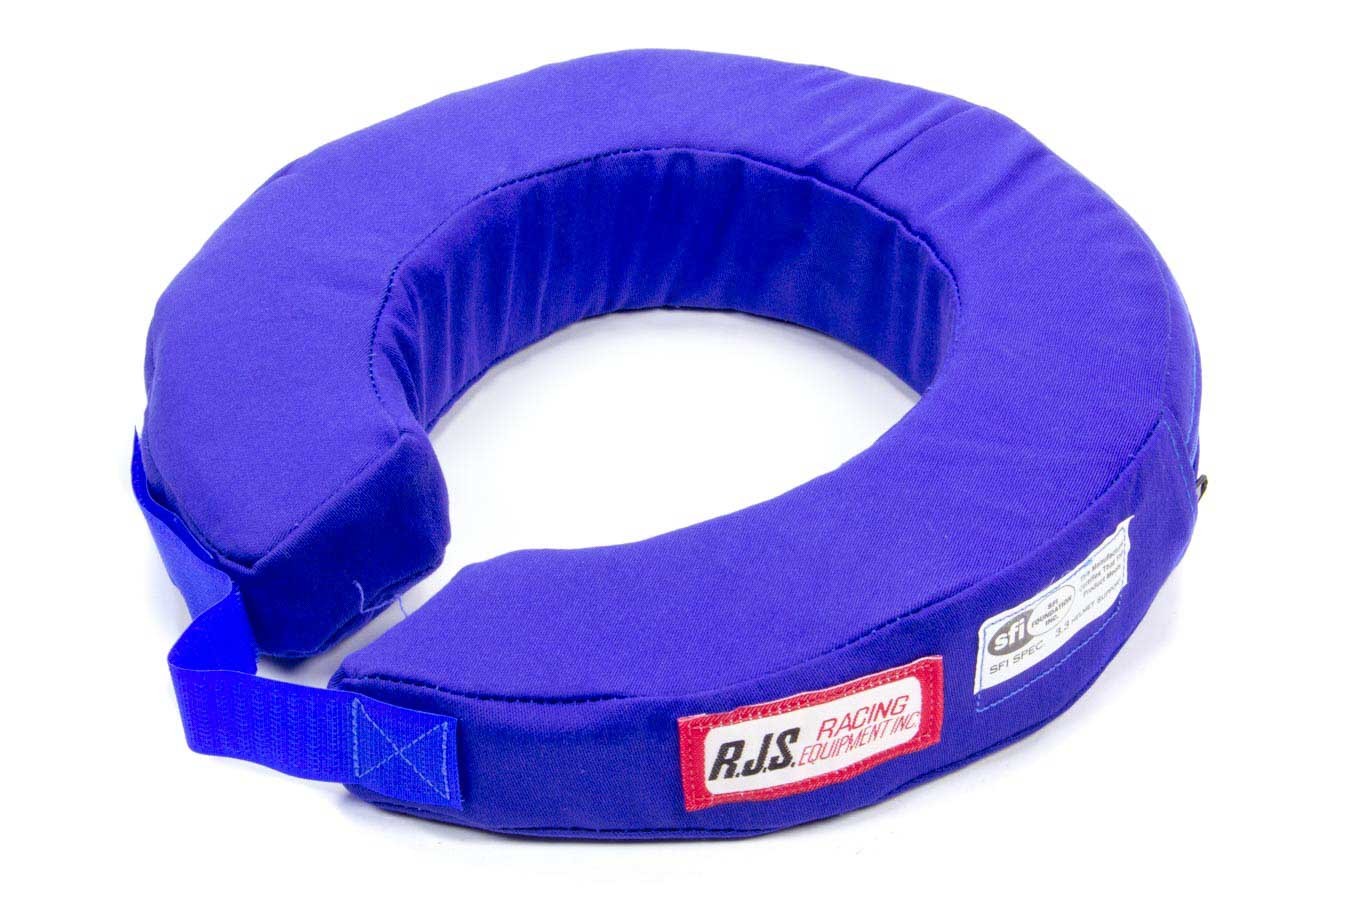 RJS Safety 11000403 Neck Support, 360 Degree, SFI 3.3, Padded, Fire Retardant Cotton, Blue, Each